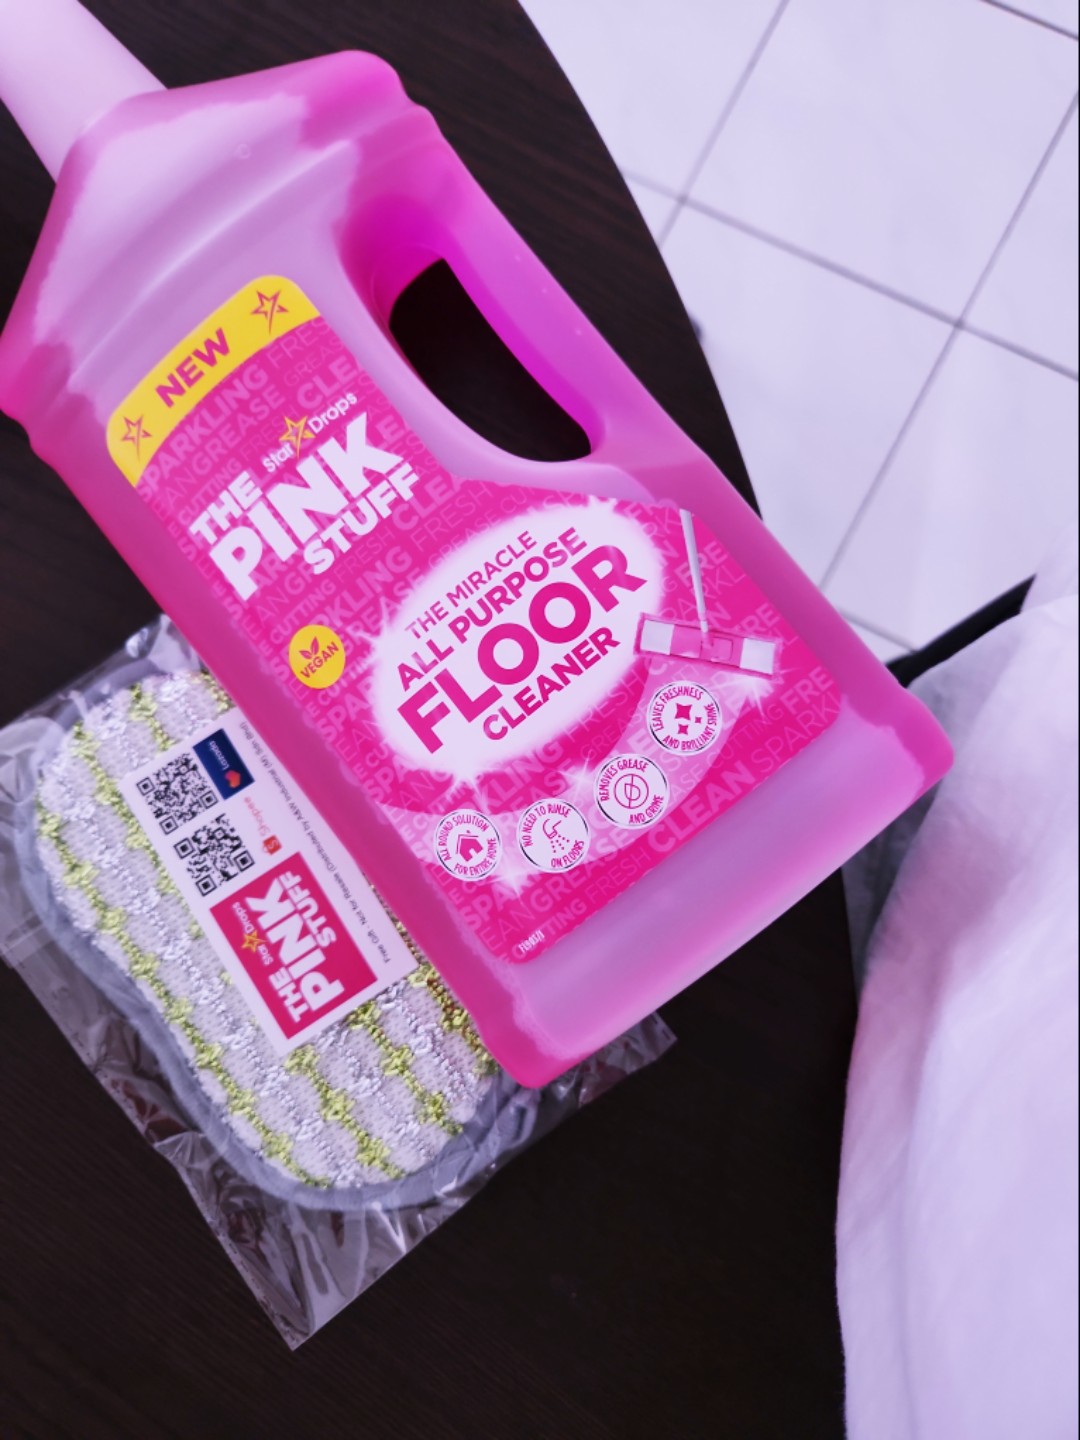 Let's wipe off the dirt from the FLOOR 🧹🪣✨ 🛒 The Pink Stuff All Purpose Floor  Cleaner ———— 𝗧𝗵𝗲 𝗣𝗶𝗻𝗸 𝗦𝘁𝘂𝗳𝗳 𝗠𝗮𝗹𝗮𝘆𝘀𝗶𝗮 🌐: Official  Website…